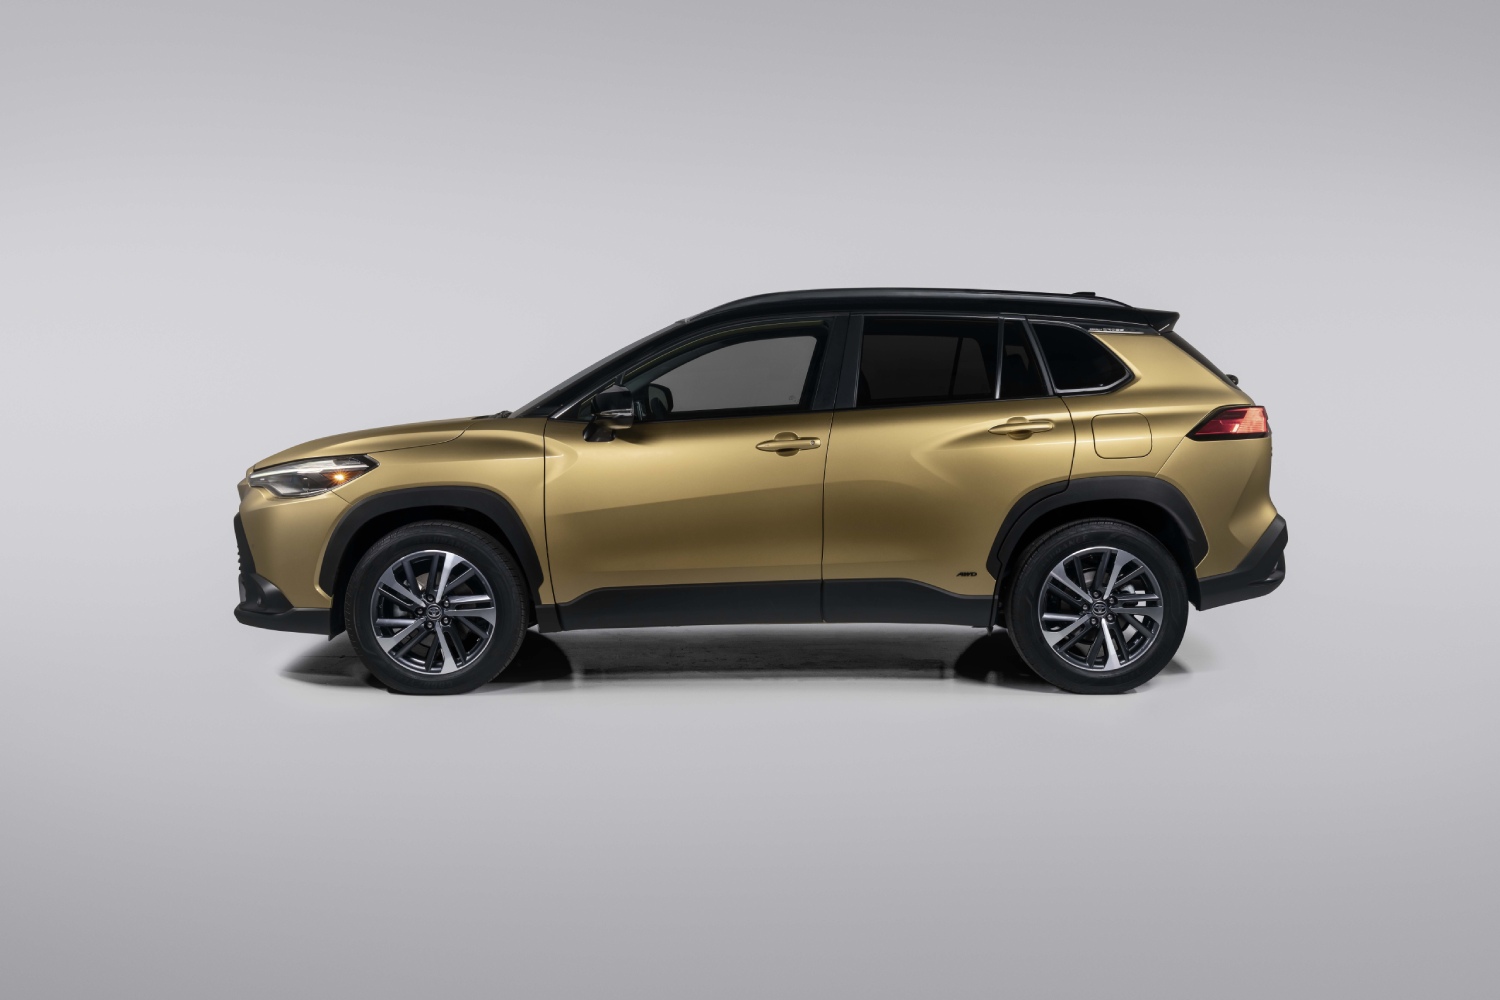 These reliable SUVs under $40,000 include the 2023 Toyota Corolla Cross